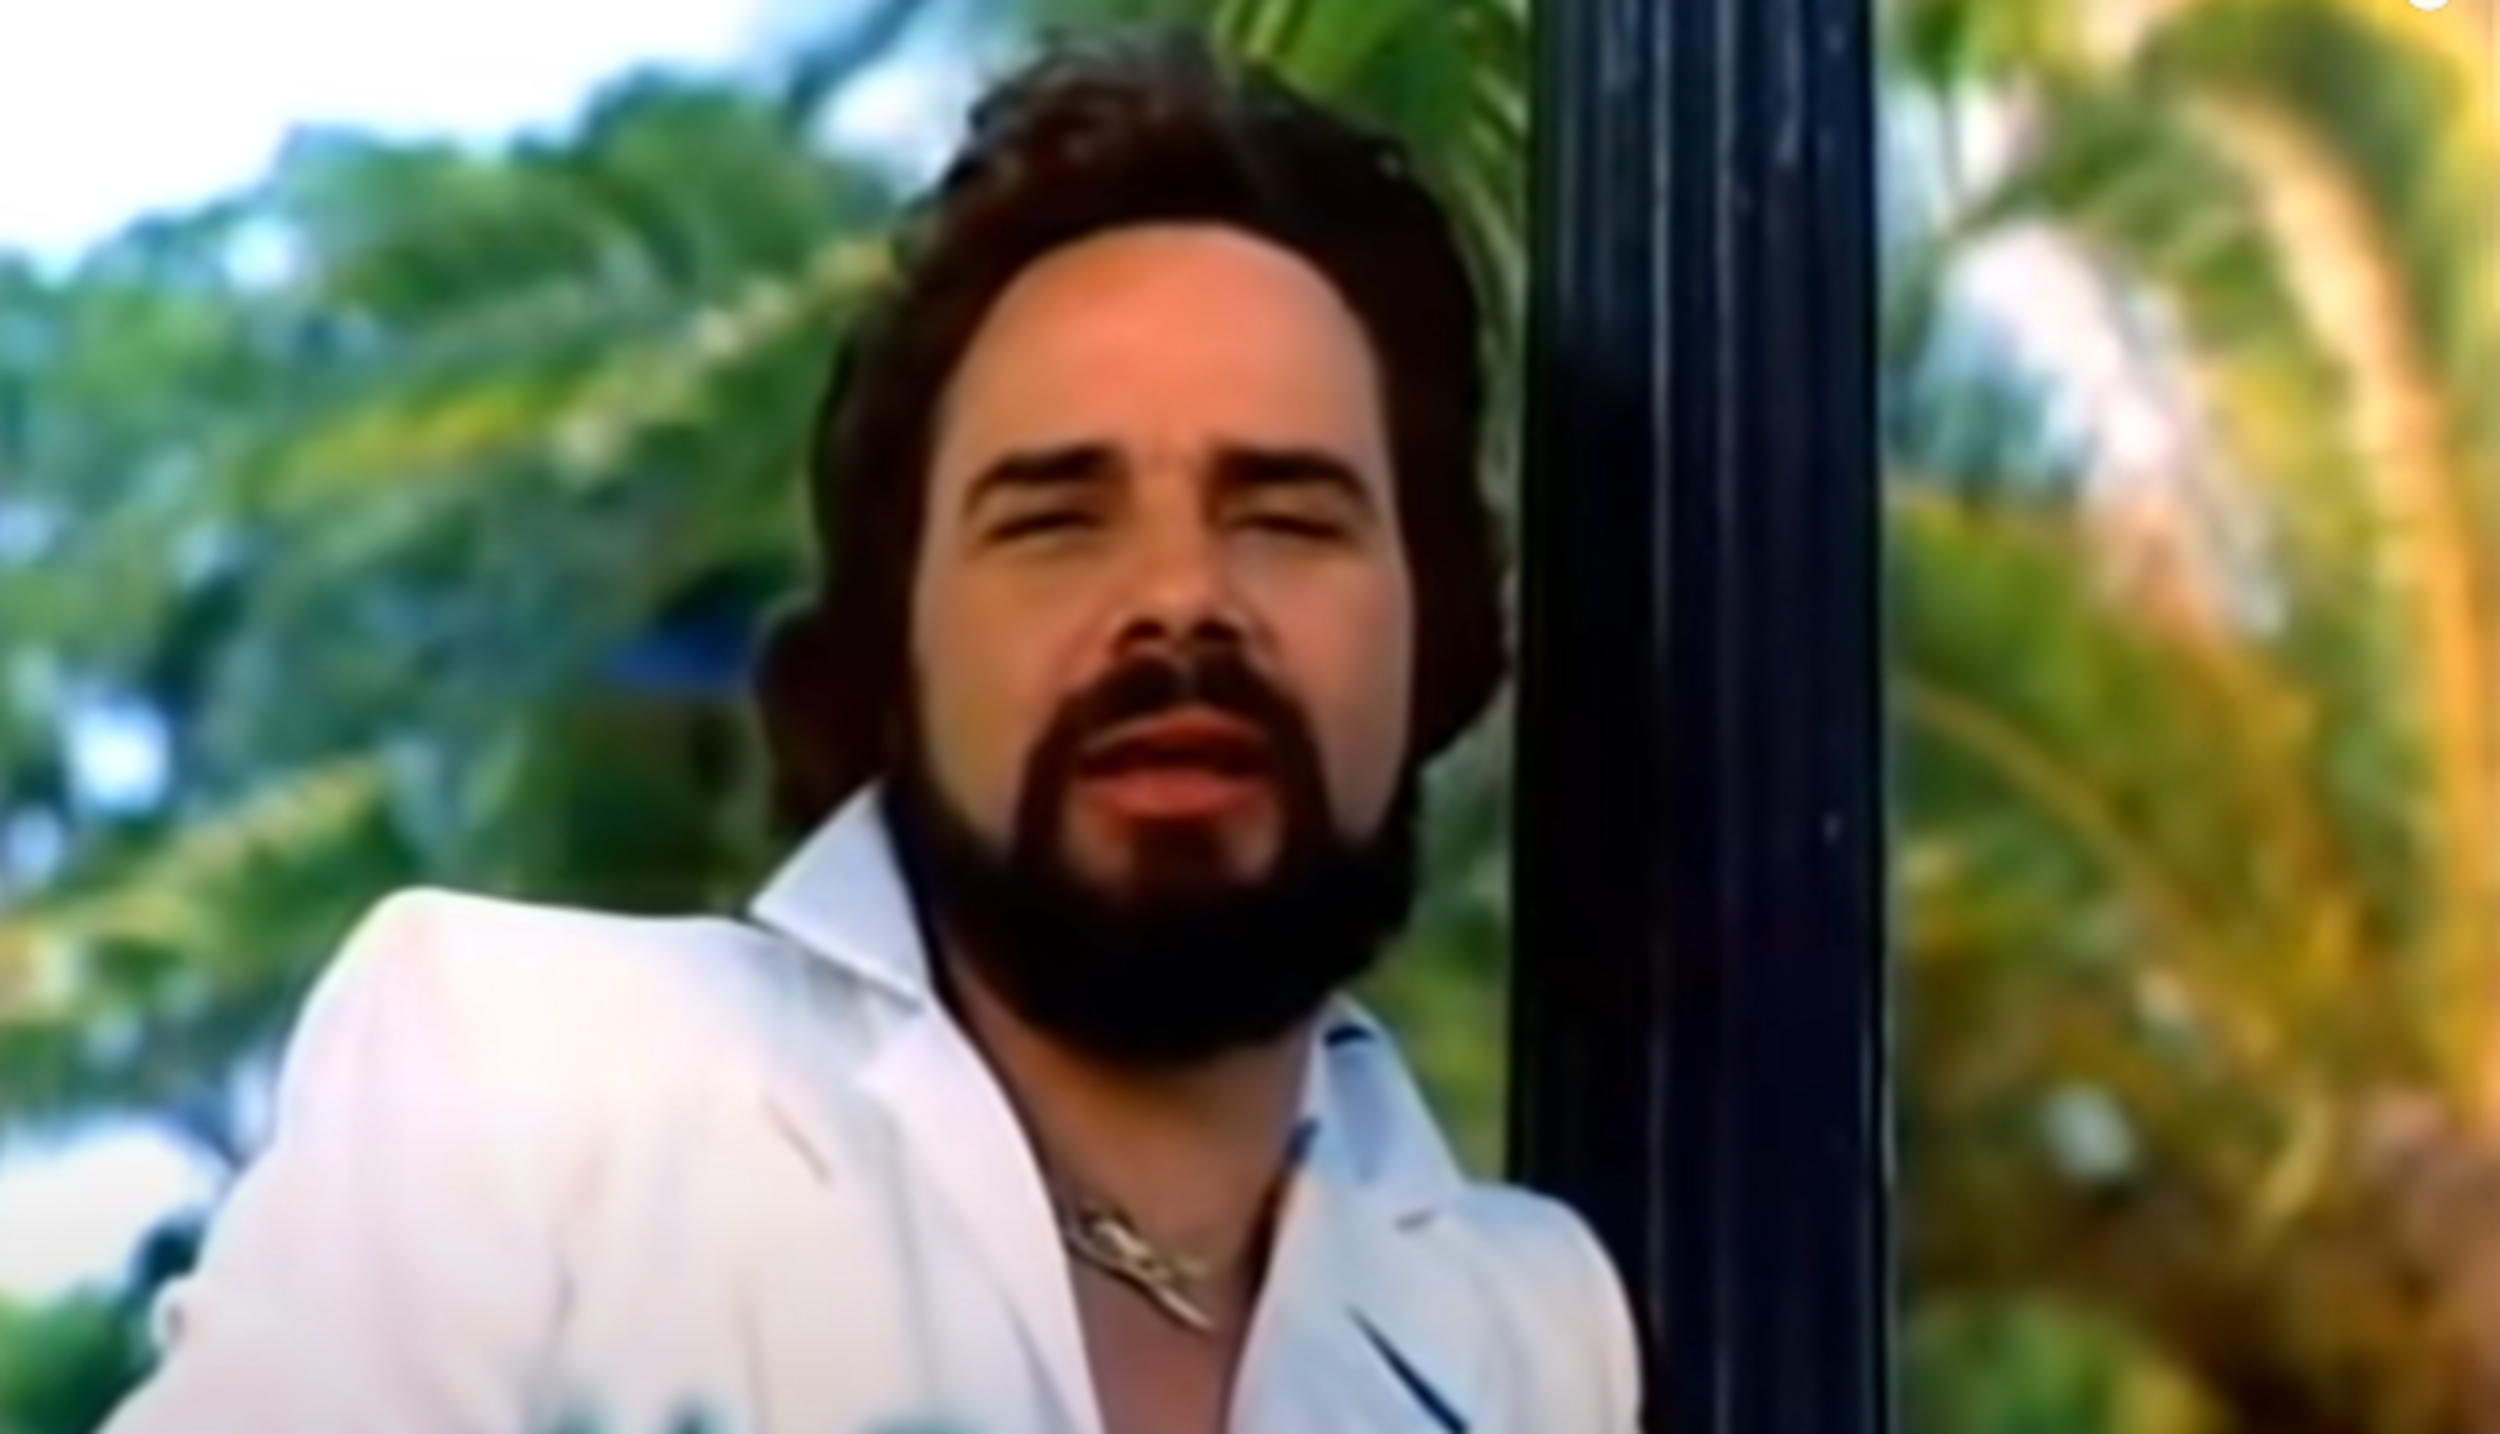 <p>Yacht rock and one-hit wonders seem to go hand-in-hand. Higgins scored one in the early 1980s with this number that reached No. 8 on the <em>Billboard</em> Hot 100. The Florida native was inspired to write this <a href="https://www.youtube.com/watch?v=Ru2tsT32pHA">song about trying to avoid a romantic breakup</a> by the 1948 movie of the same name, starring Humphrey Bogart and Lauren Bacall, who are referenced in the tune. Though Higgins never enjoyed the same individual success as a musician, the song has had a solid shelf life and remains a definitive moment in the yacht rock genre.</p><p>You may also like: <a href='https://www.yardbarker.com/entertainment/articles/old_school_nintendo_games_wed_like_to_see_rebooted_030924/s1__36058790'>Old-school Nintendo games we'd like to see rebooted</a></p>